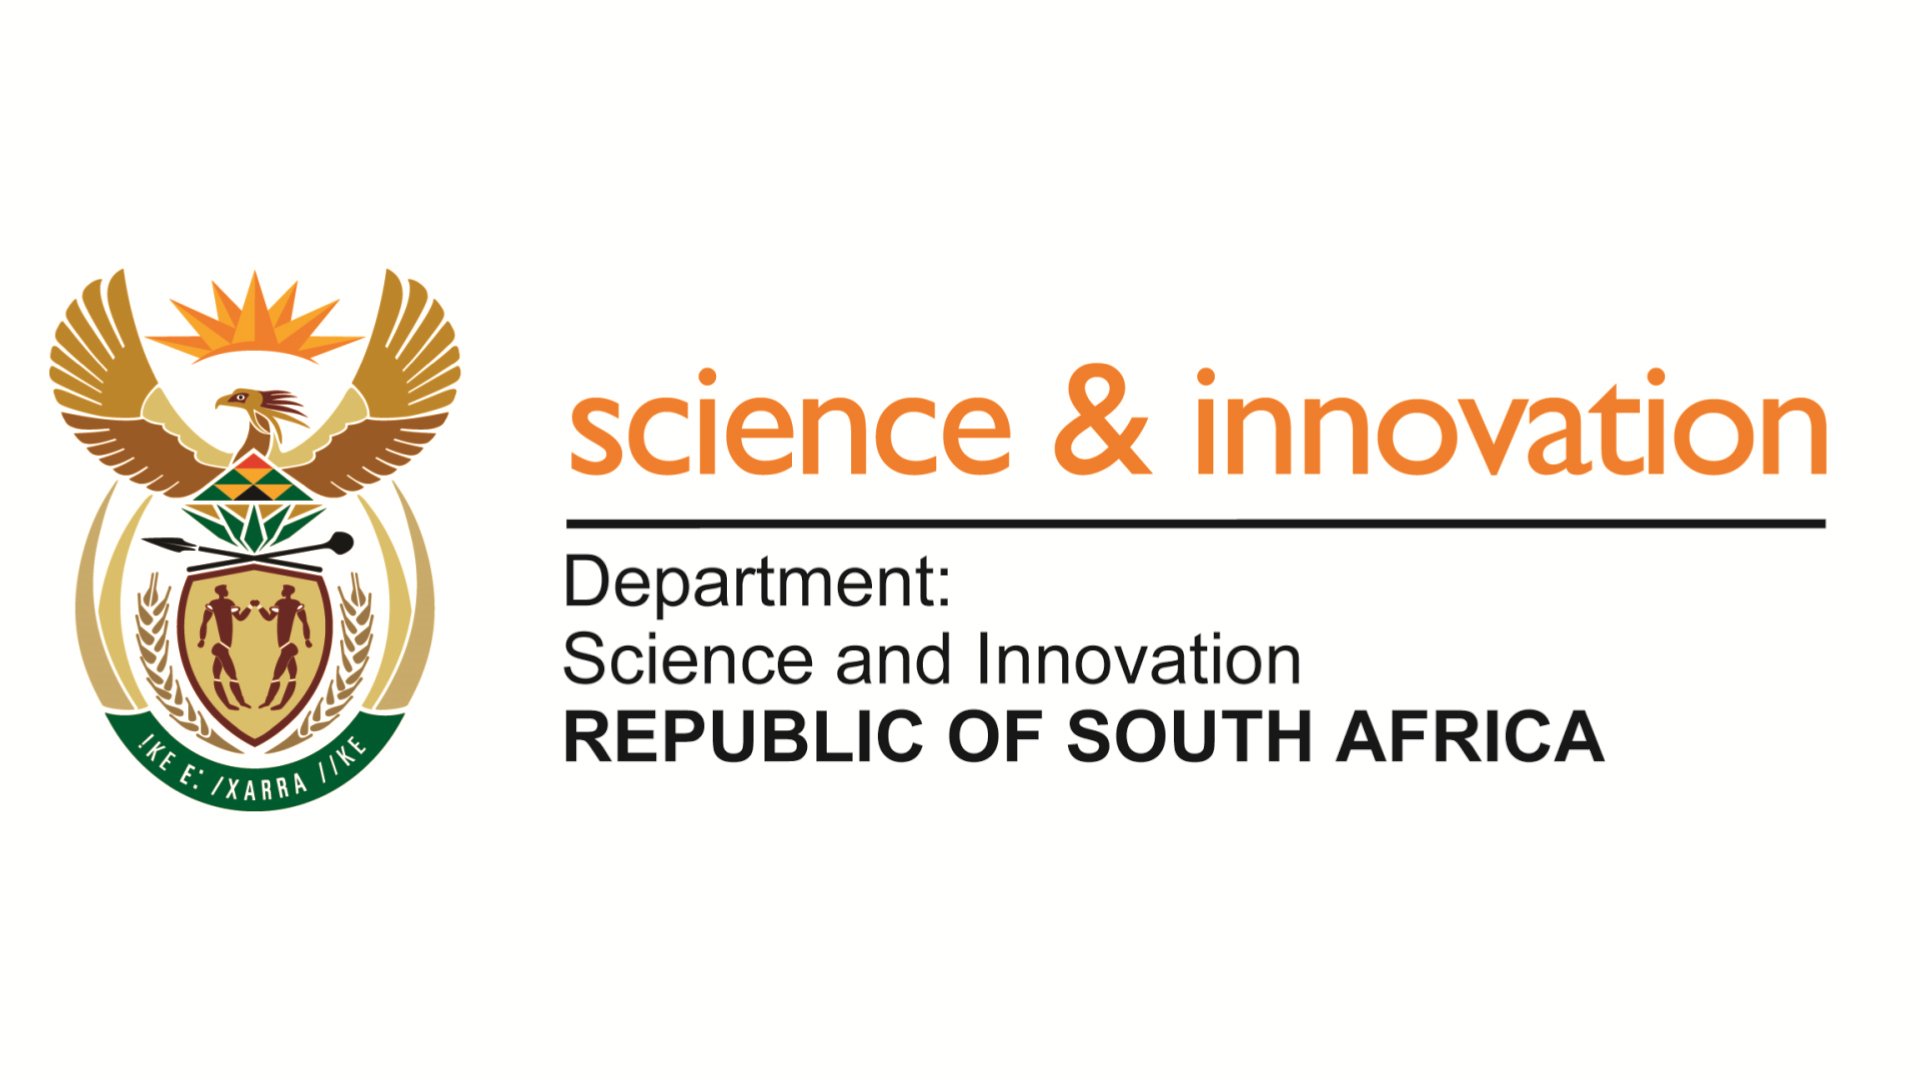 Department of Science and Innovation (South Africa) Logo